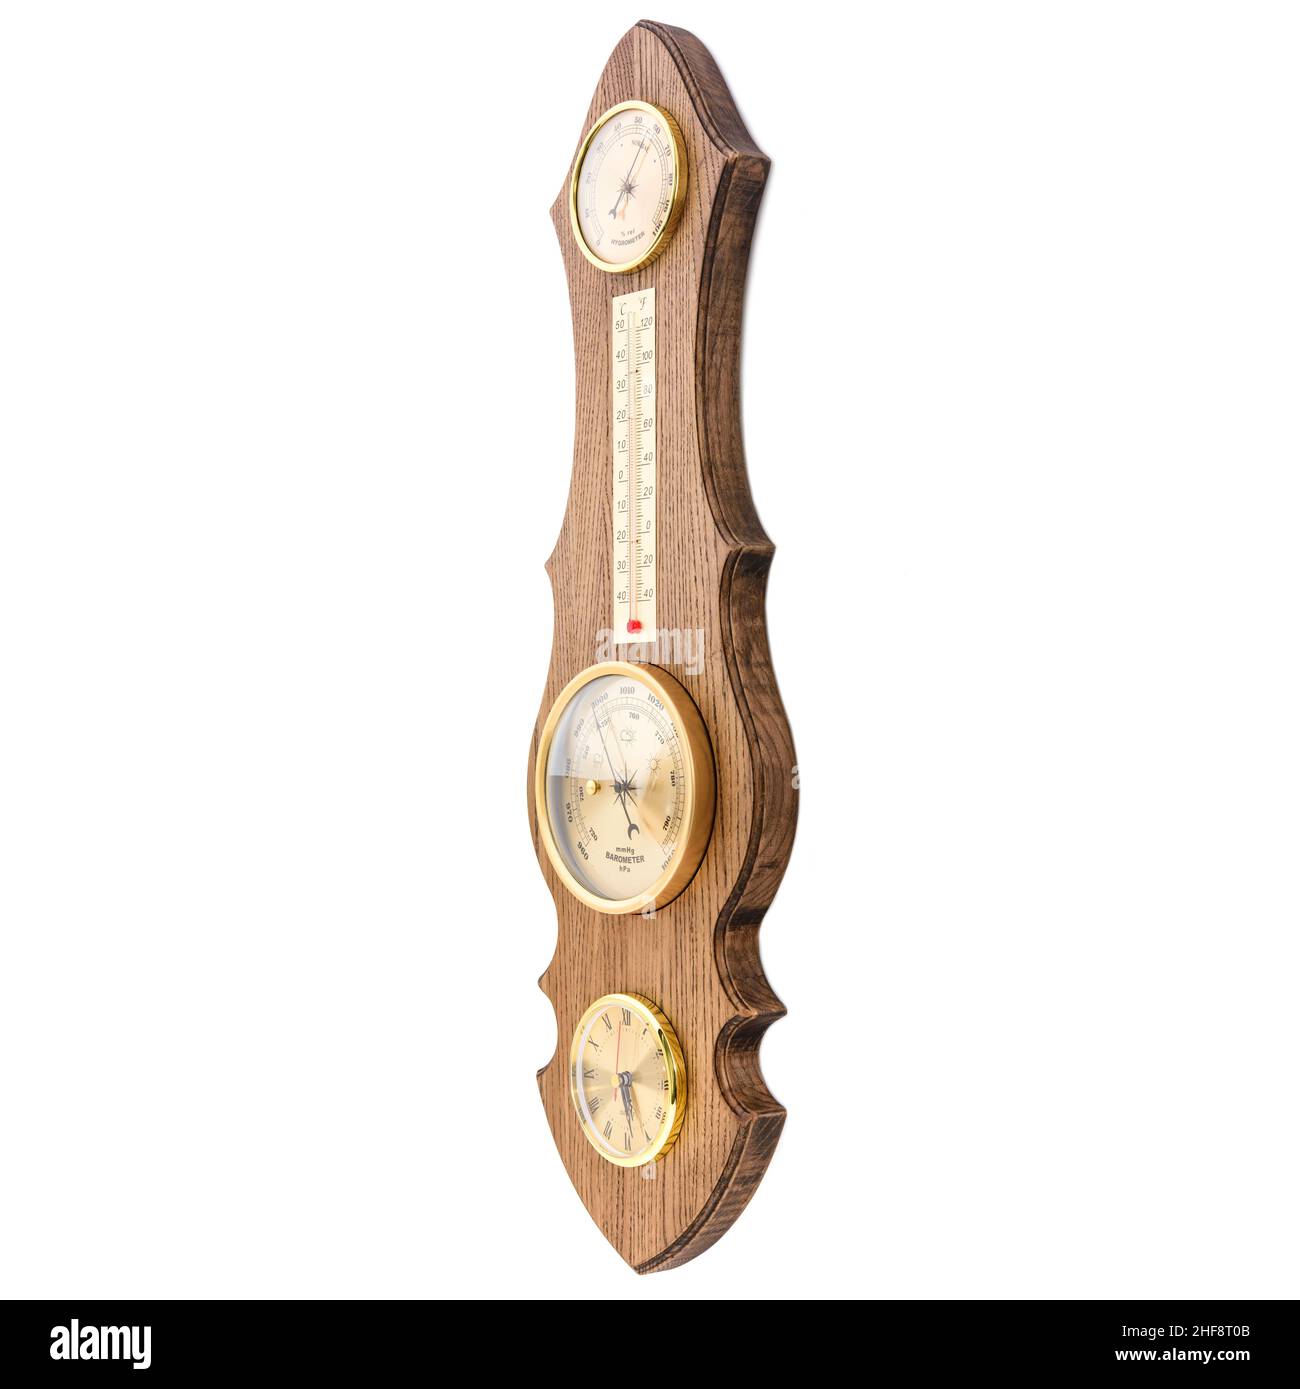 https://c8.alamy.com/comp/2HF8T0B/vintage-wooden-clock-with-barometer-and-old-marine-style-thermometer-on-a-white-background-wall-decor-for-the-interior-2HF8T0B.jpg